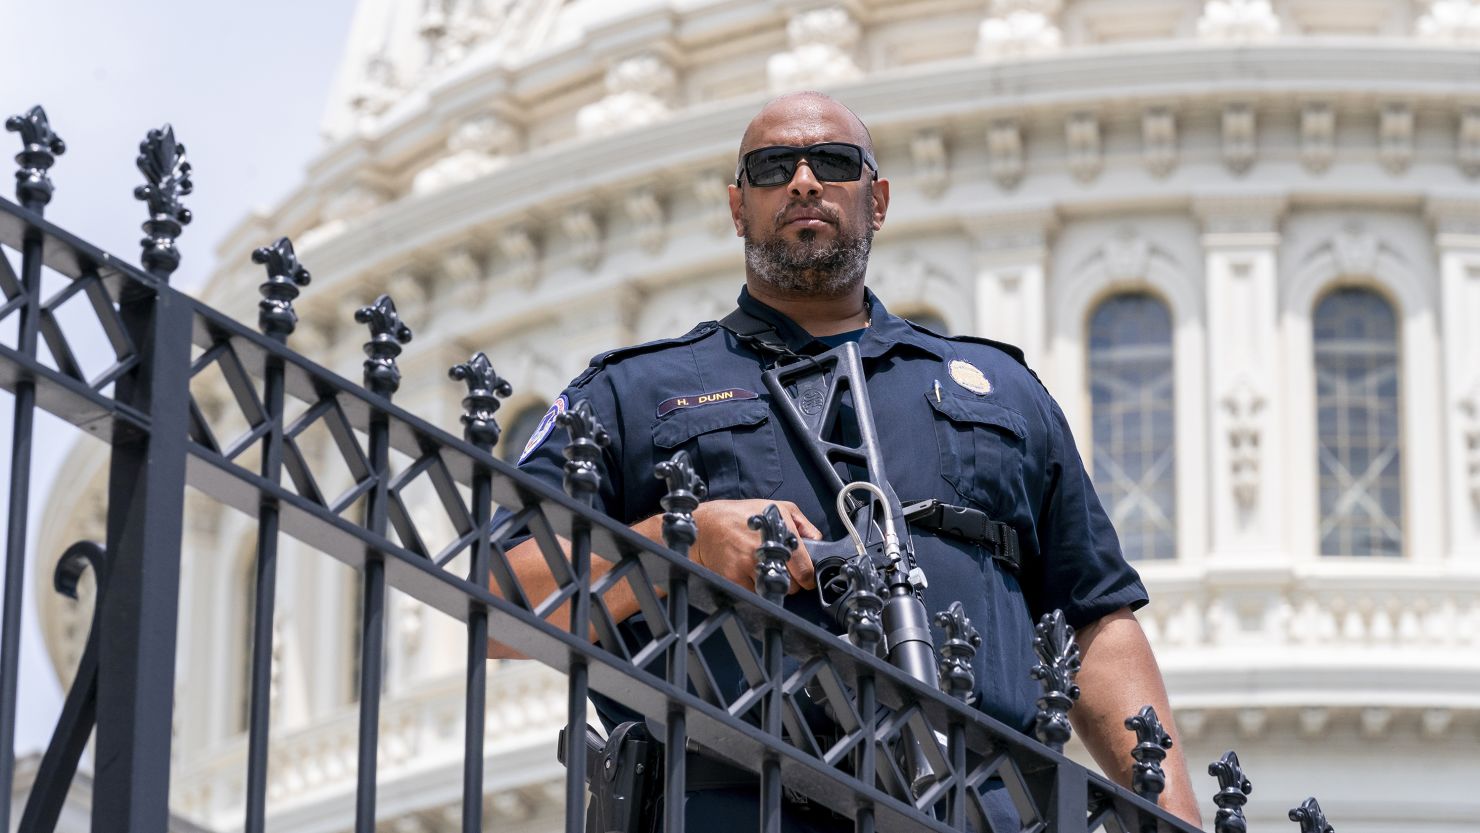 U.S. Capitol Police Sgt. Harry Dunn, who defended the Capitol when pro-Trump insurrectionists attacked Jan. 6, 2021, keeps watch over the East Plaza while Speaker of the House Nancy Pelosi, D-Calif., and other lawmakers hold an event on the House steps, at the Capitol in Washington, Friday, June 24, 2022. (AP Photo/J. Scott Applewhite)